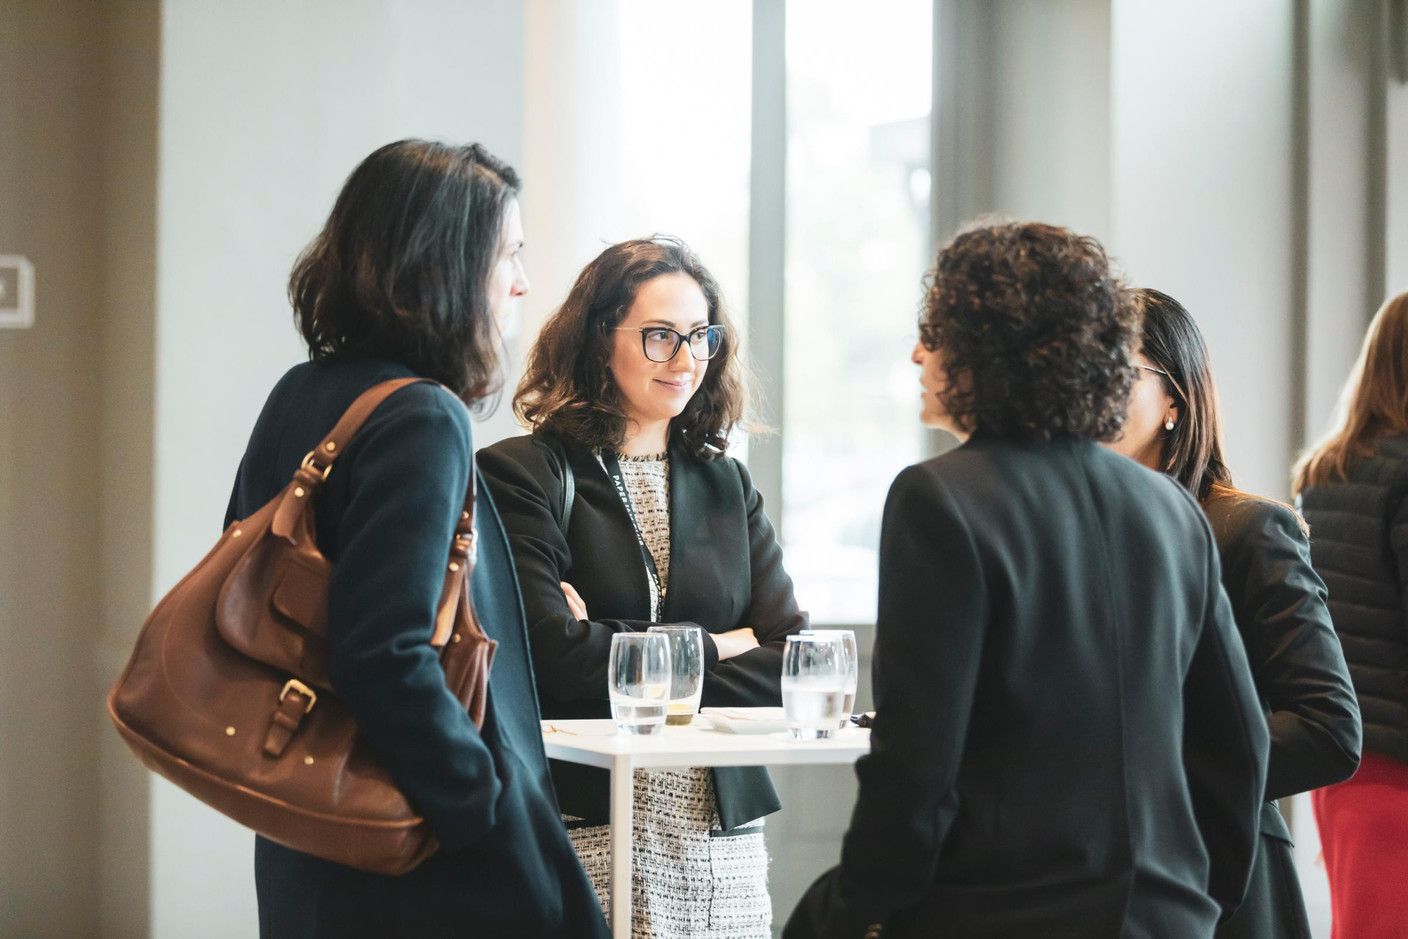 The changing role of women in managing family wealth - 01.10.2019 (Photo: Patricia Pitsch/Maison Moderne)